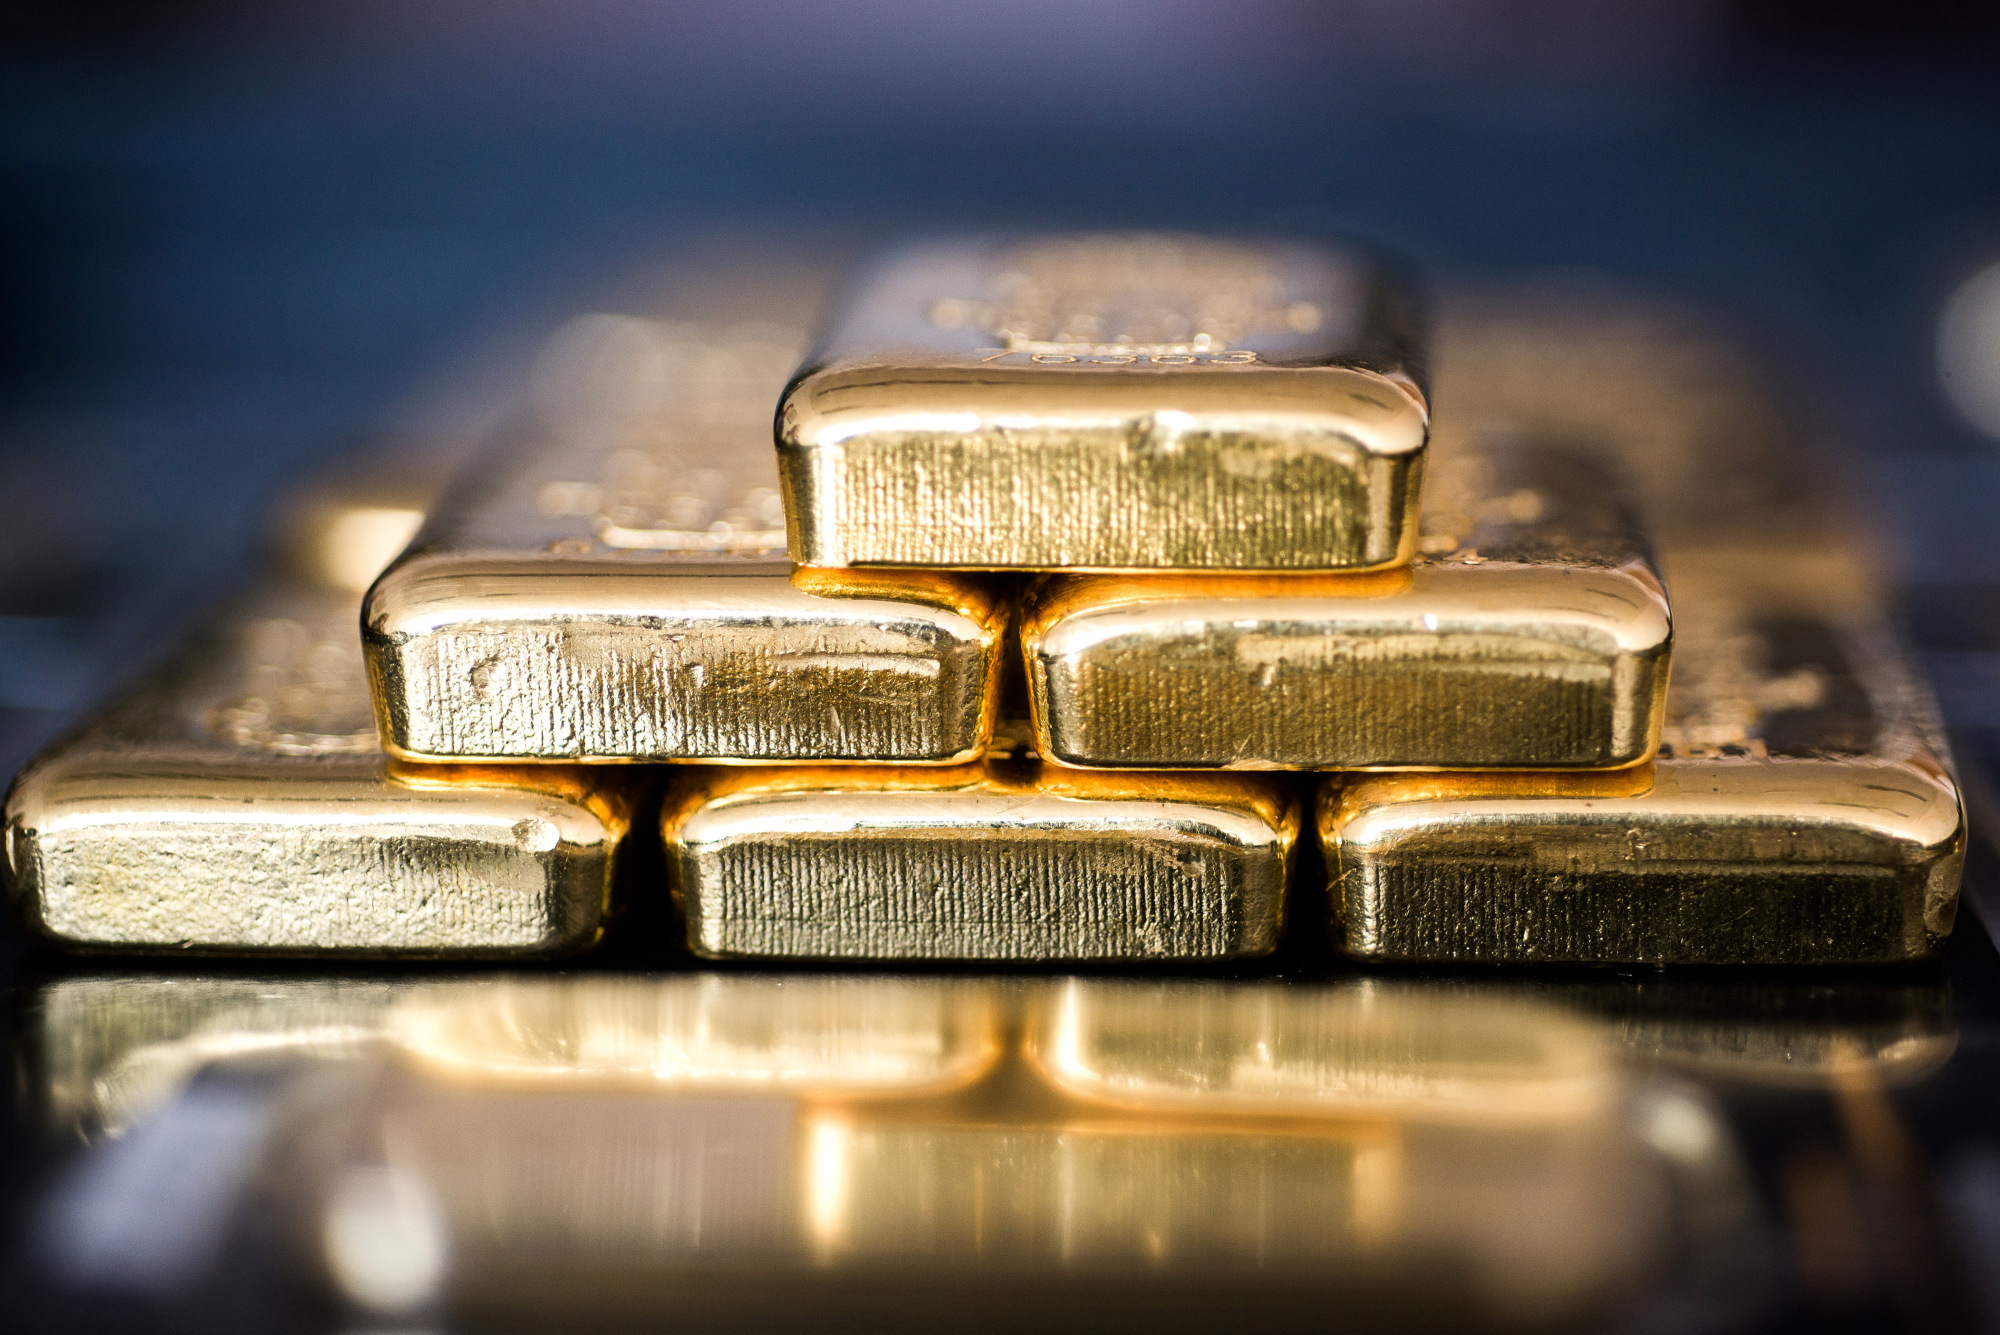 If everything’s&nbsp;so good, why is China loading up on&nbsp;gold?